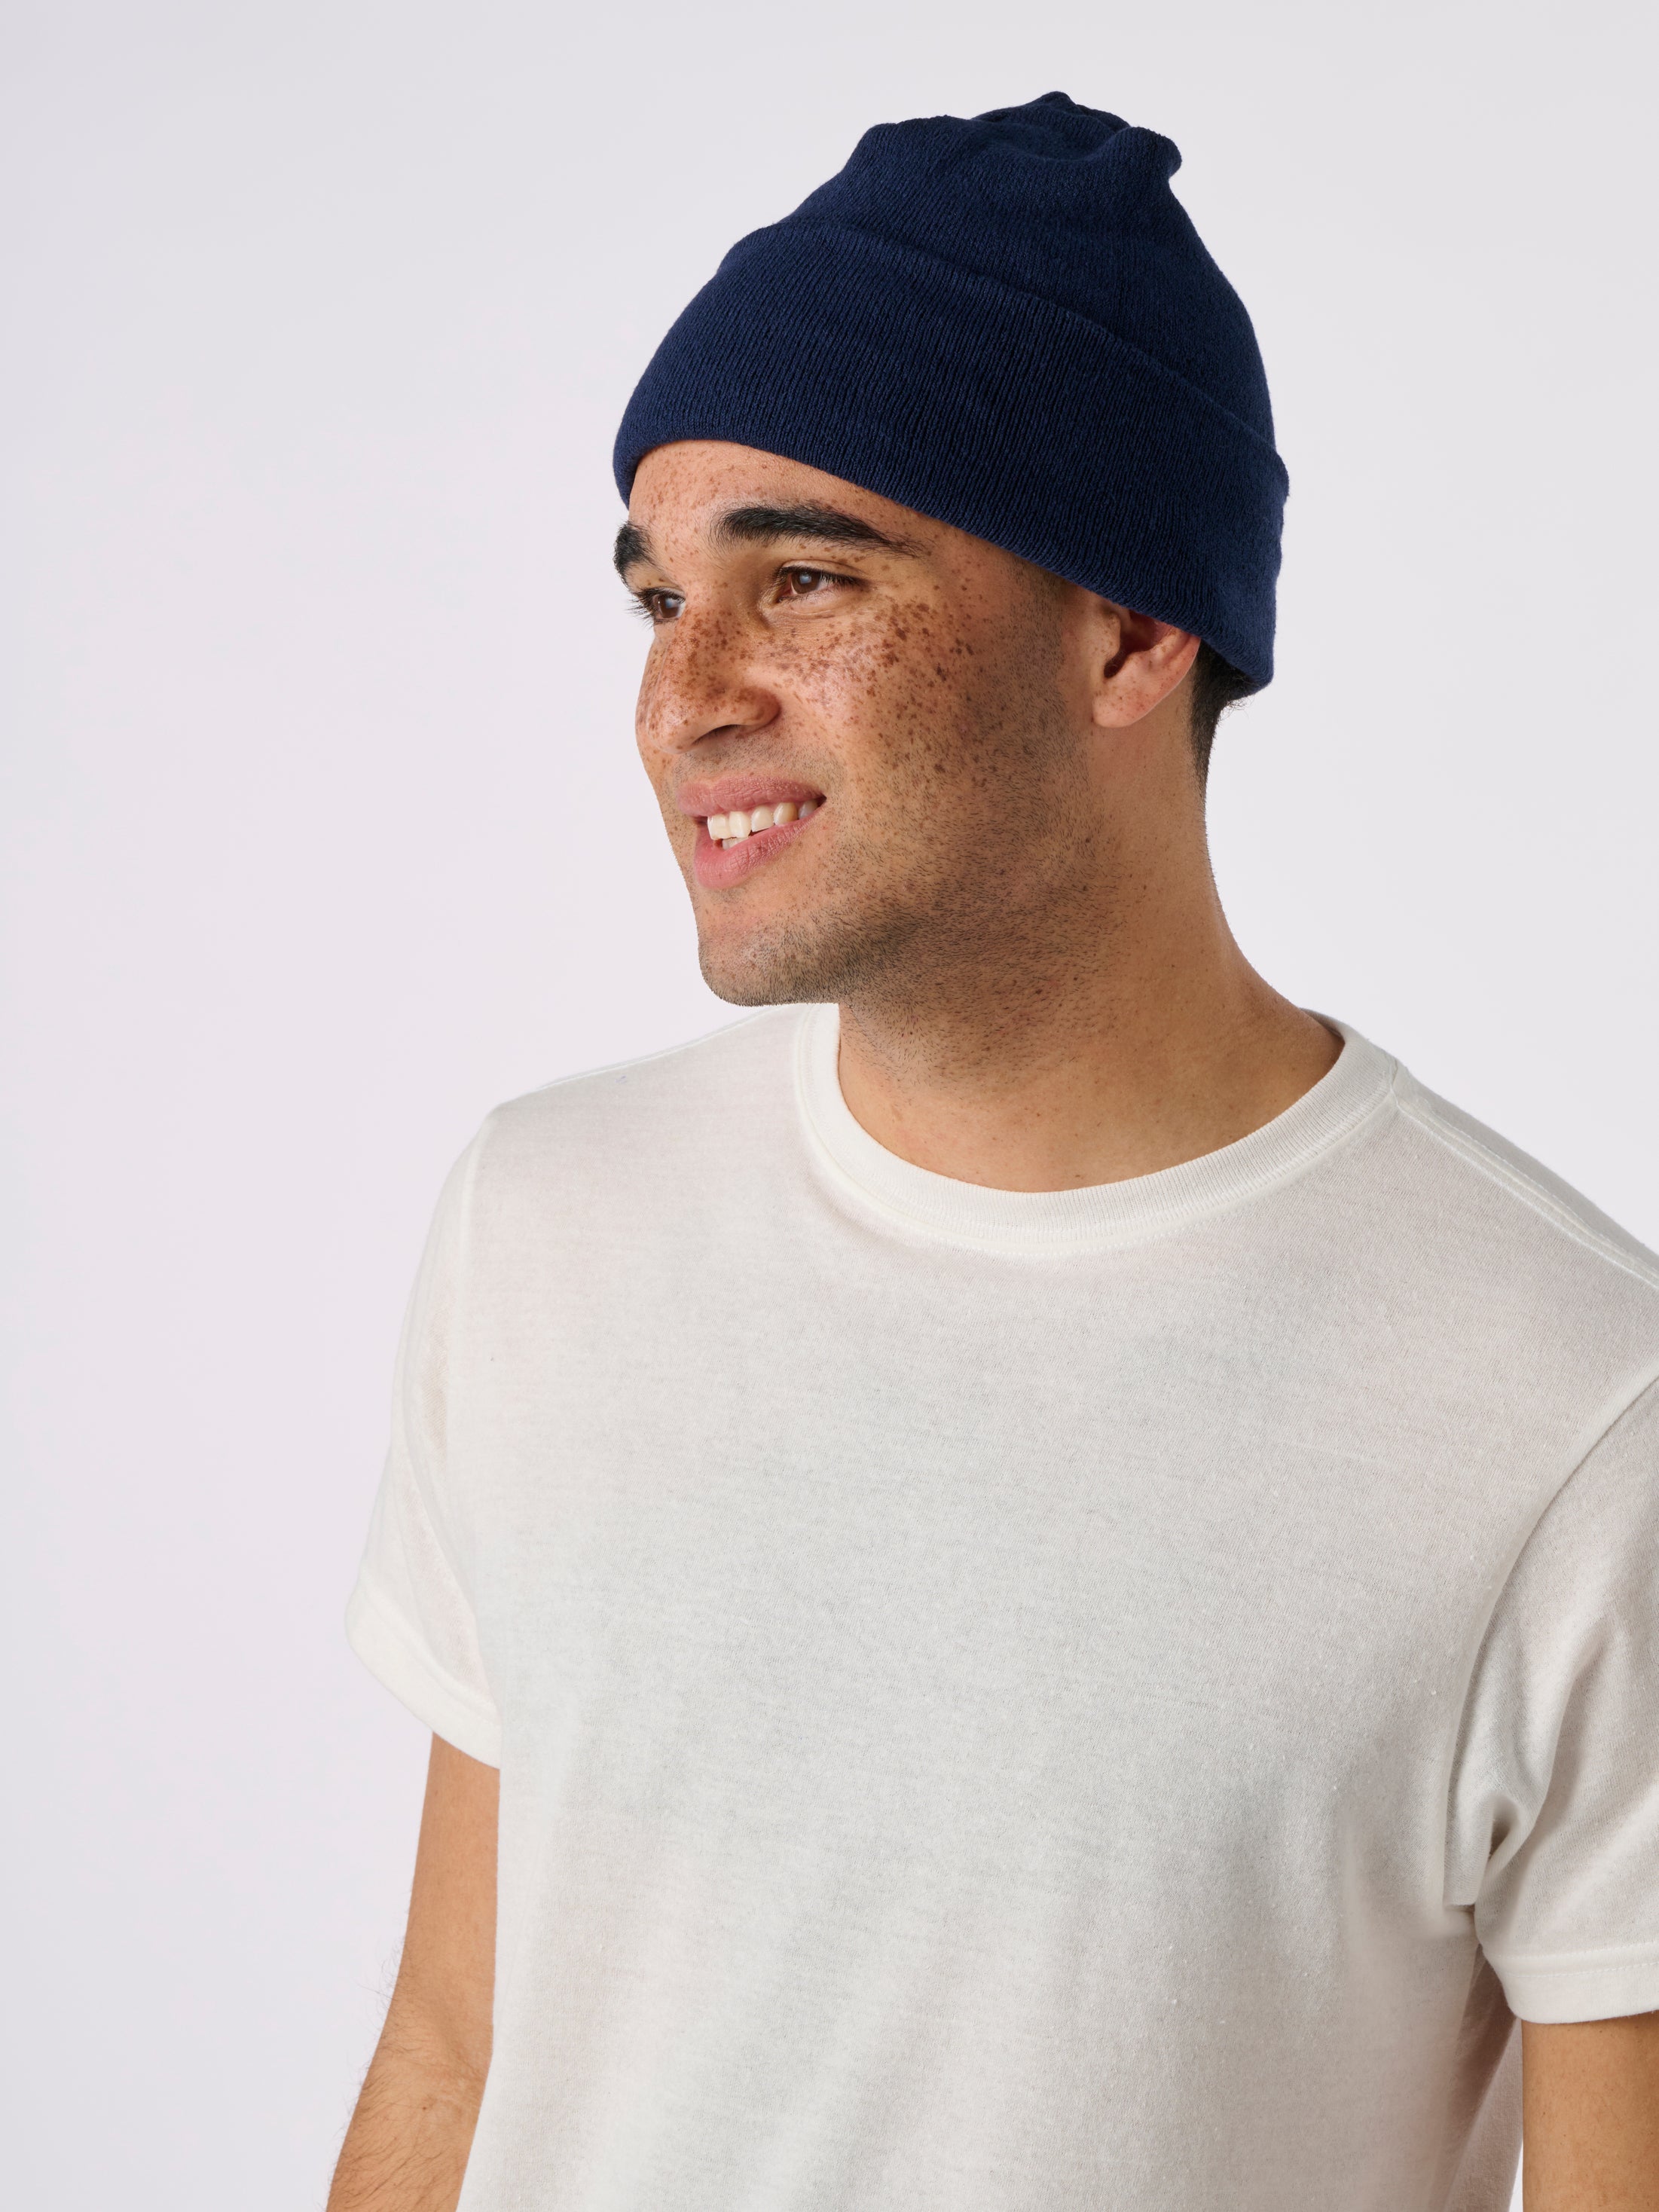 RECOVER_RA6200_BEANIE_NAVY_FRONT.jpg